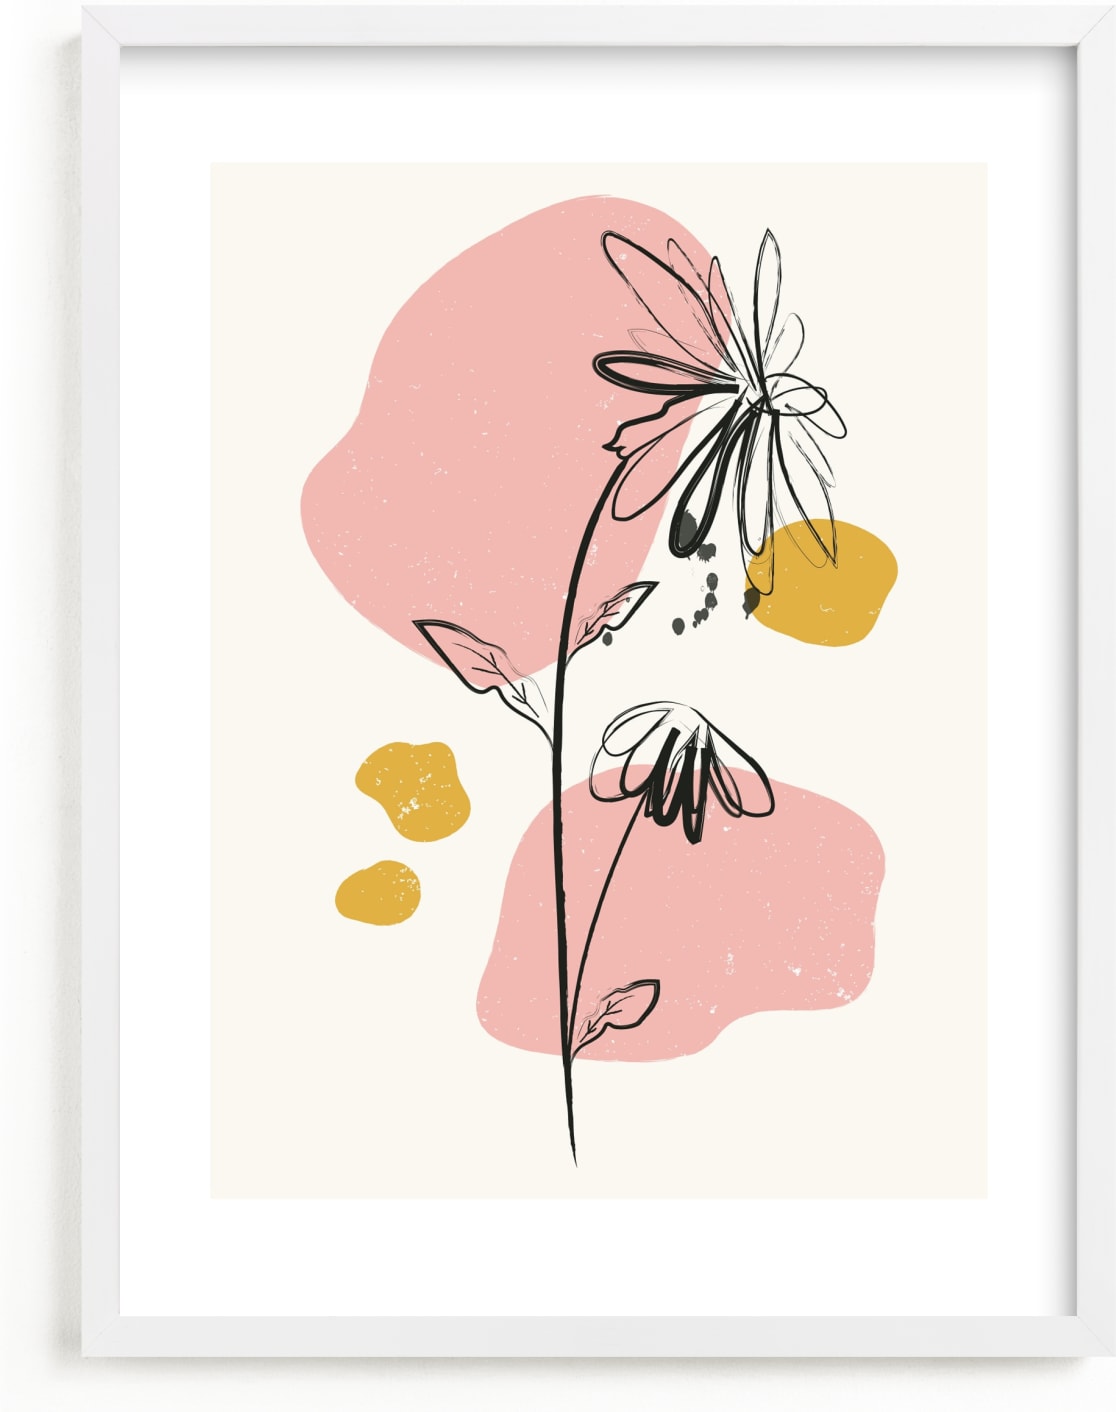 This is a yellow kids wall art by Kanika Mathur called Mod Floral 2.